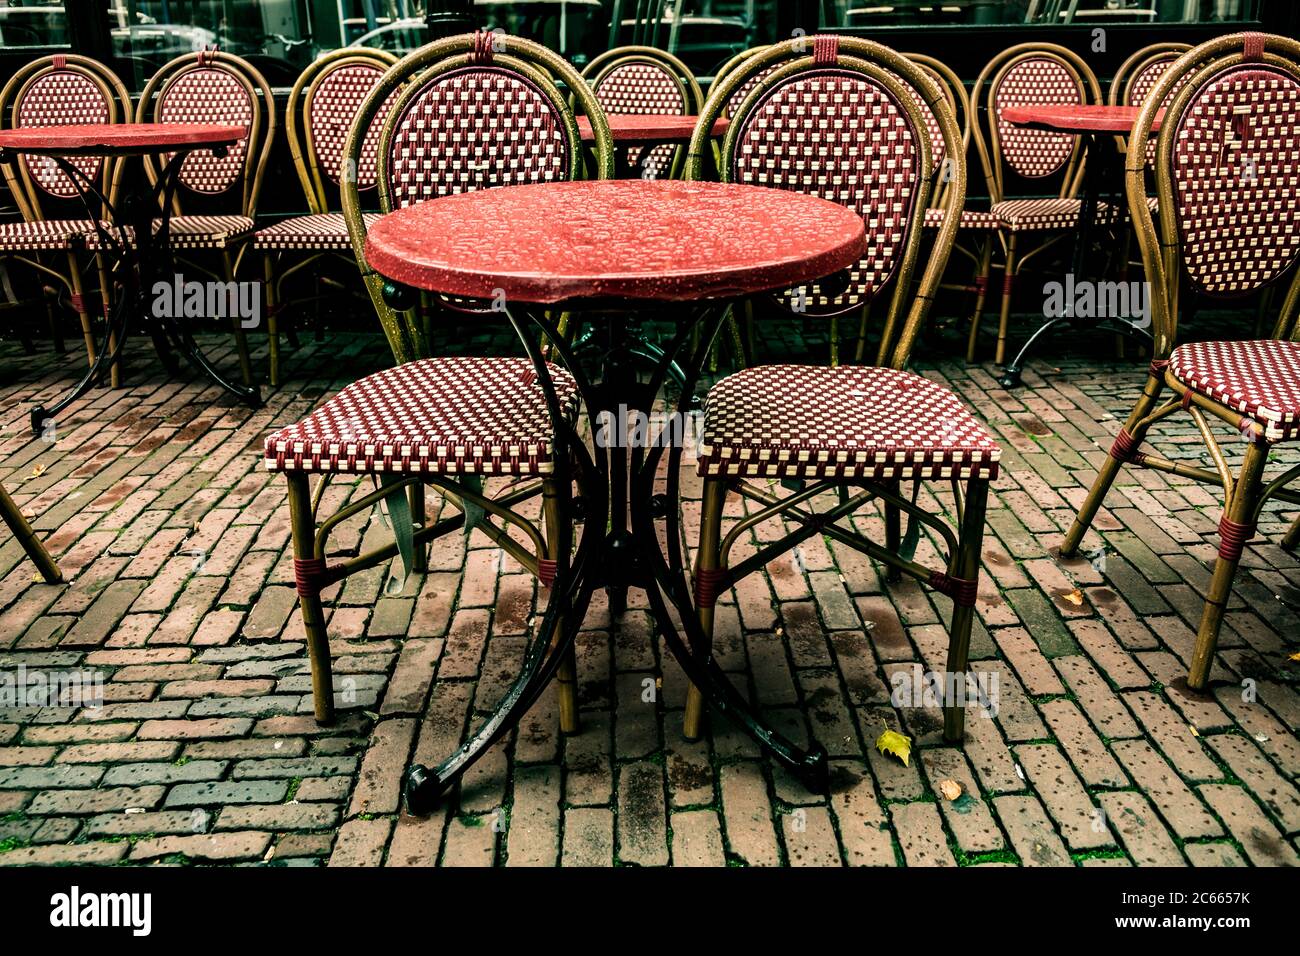 Rainy cafe table and chairs in Amsterdam, Holland, Netherlands Stock Photo